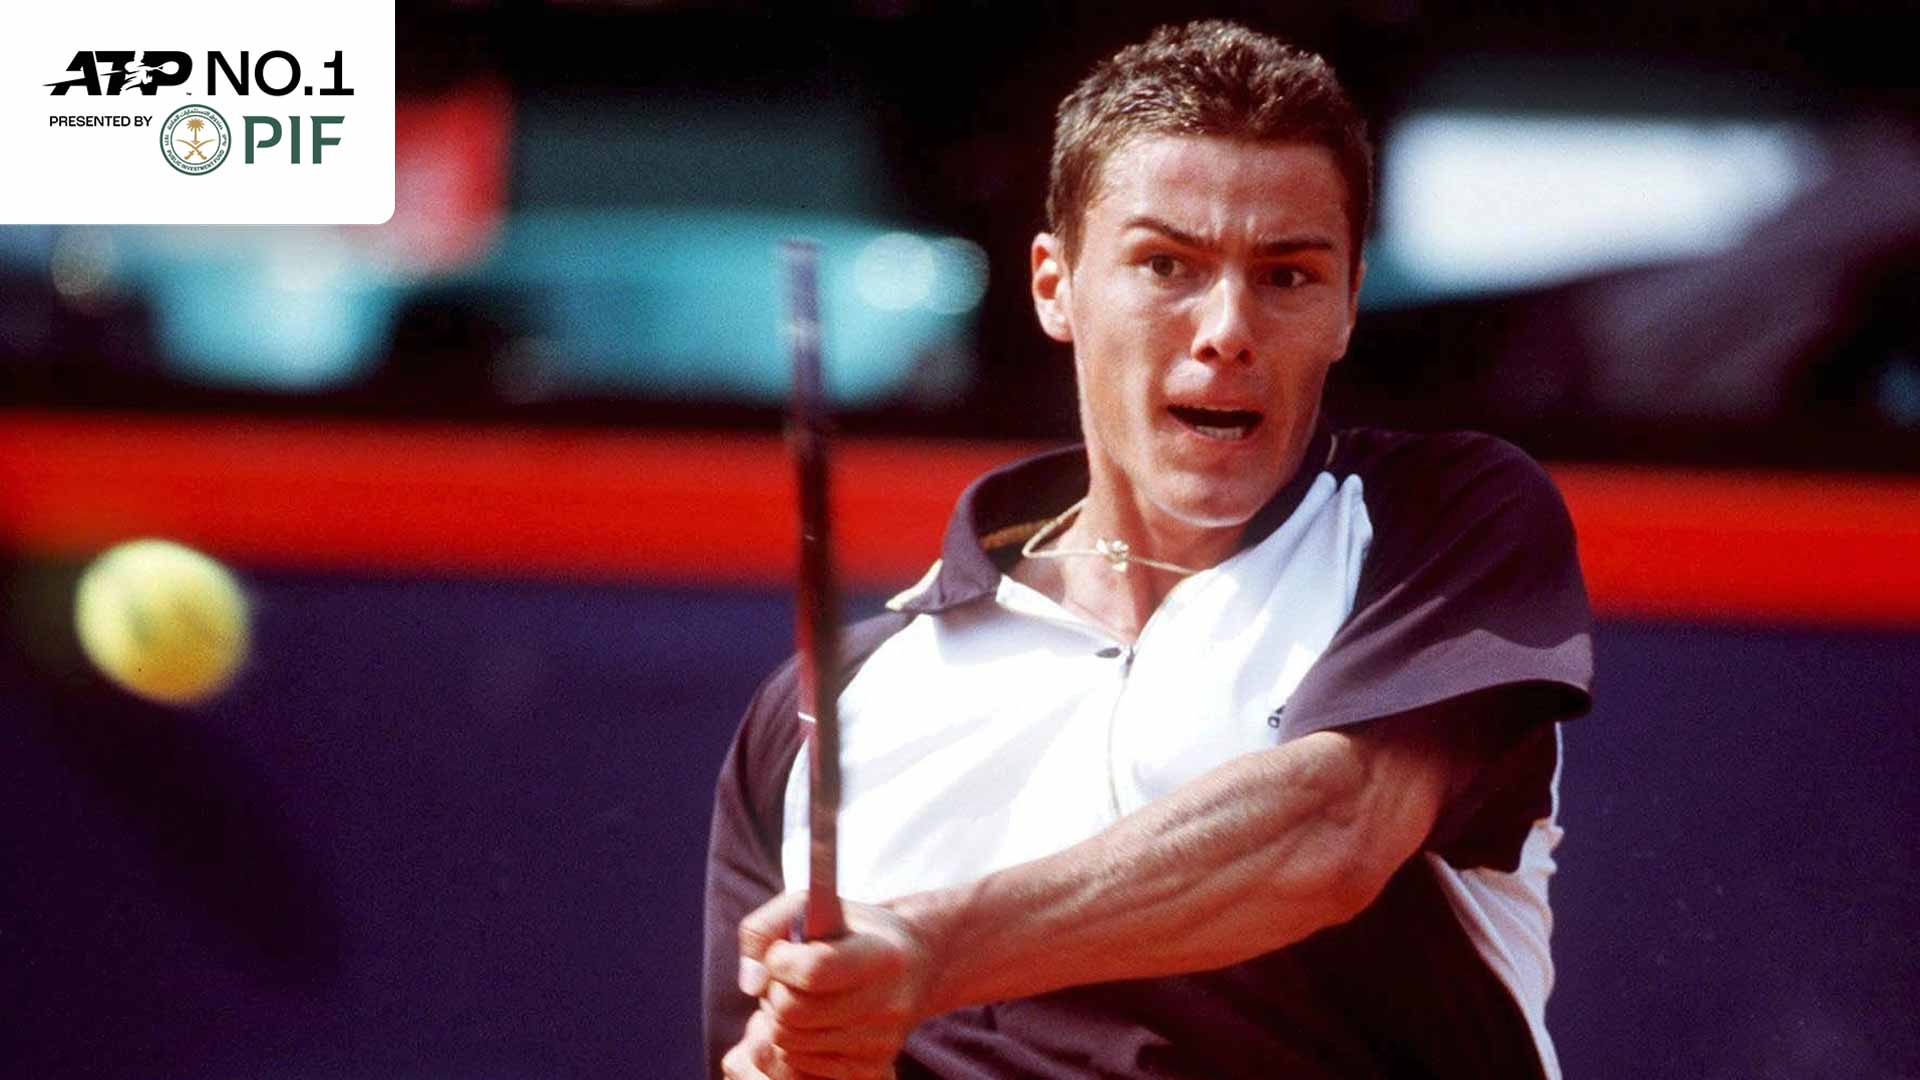 Marat Safin won seven of his 15 ATP Tour titles in 2000, the year he first rose to No. 1 in the PIF ATP Rankings.